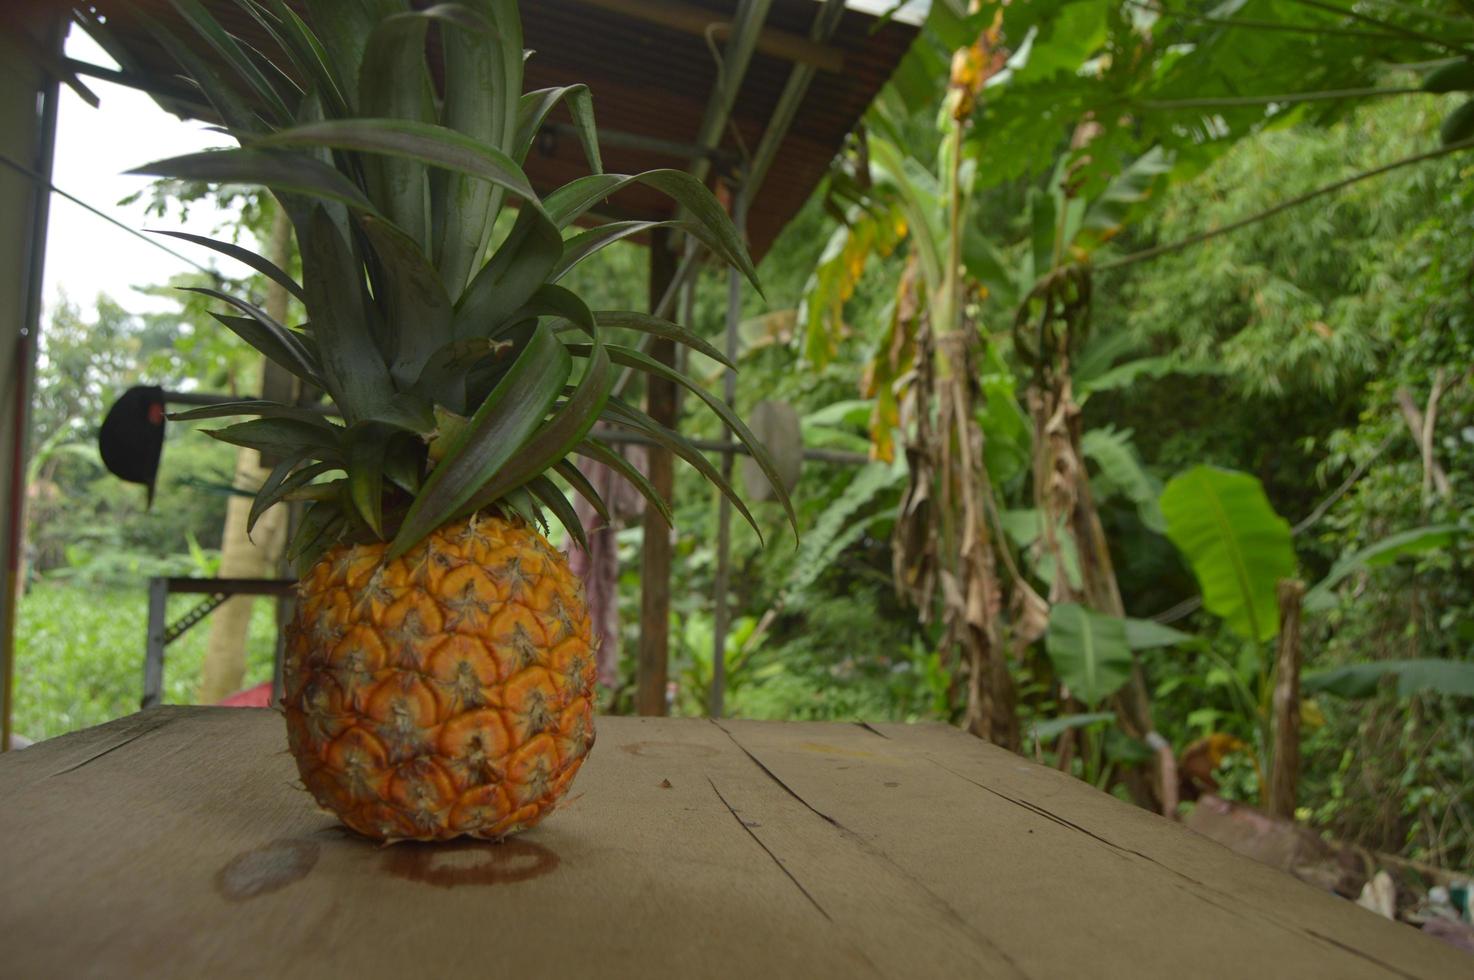 Photo of fresh pineapple with leaves still attached.  using a wooden background in an outdoor garden.